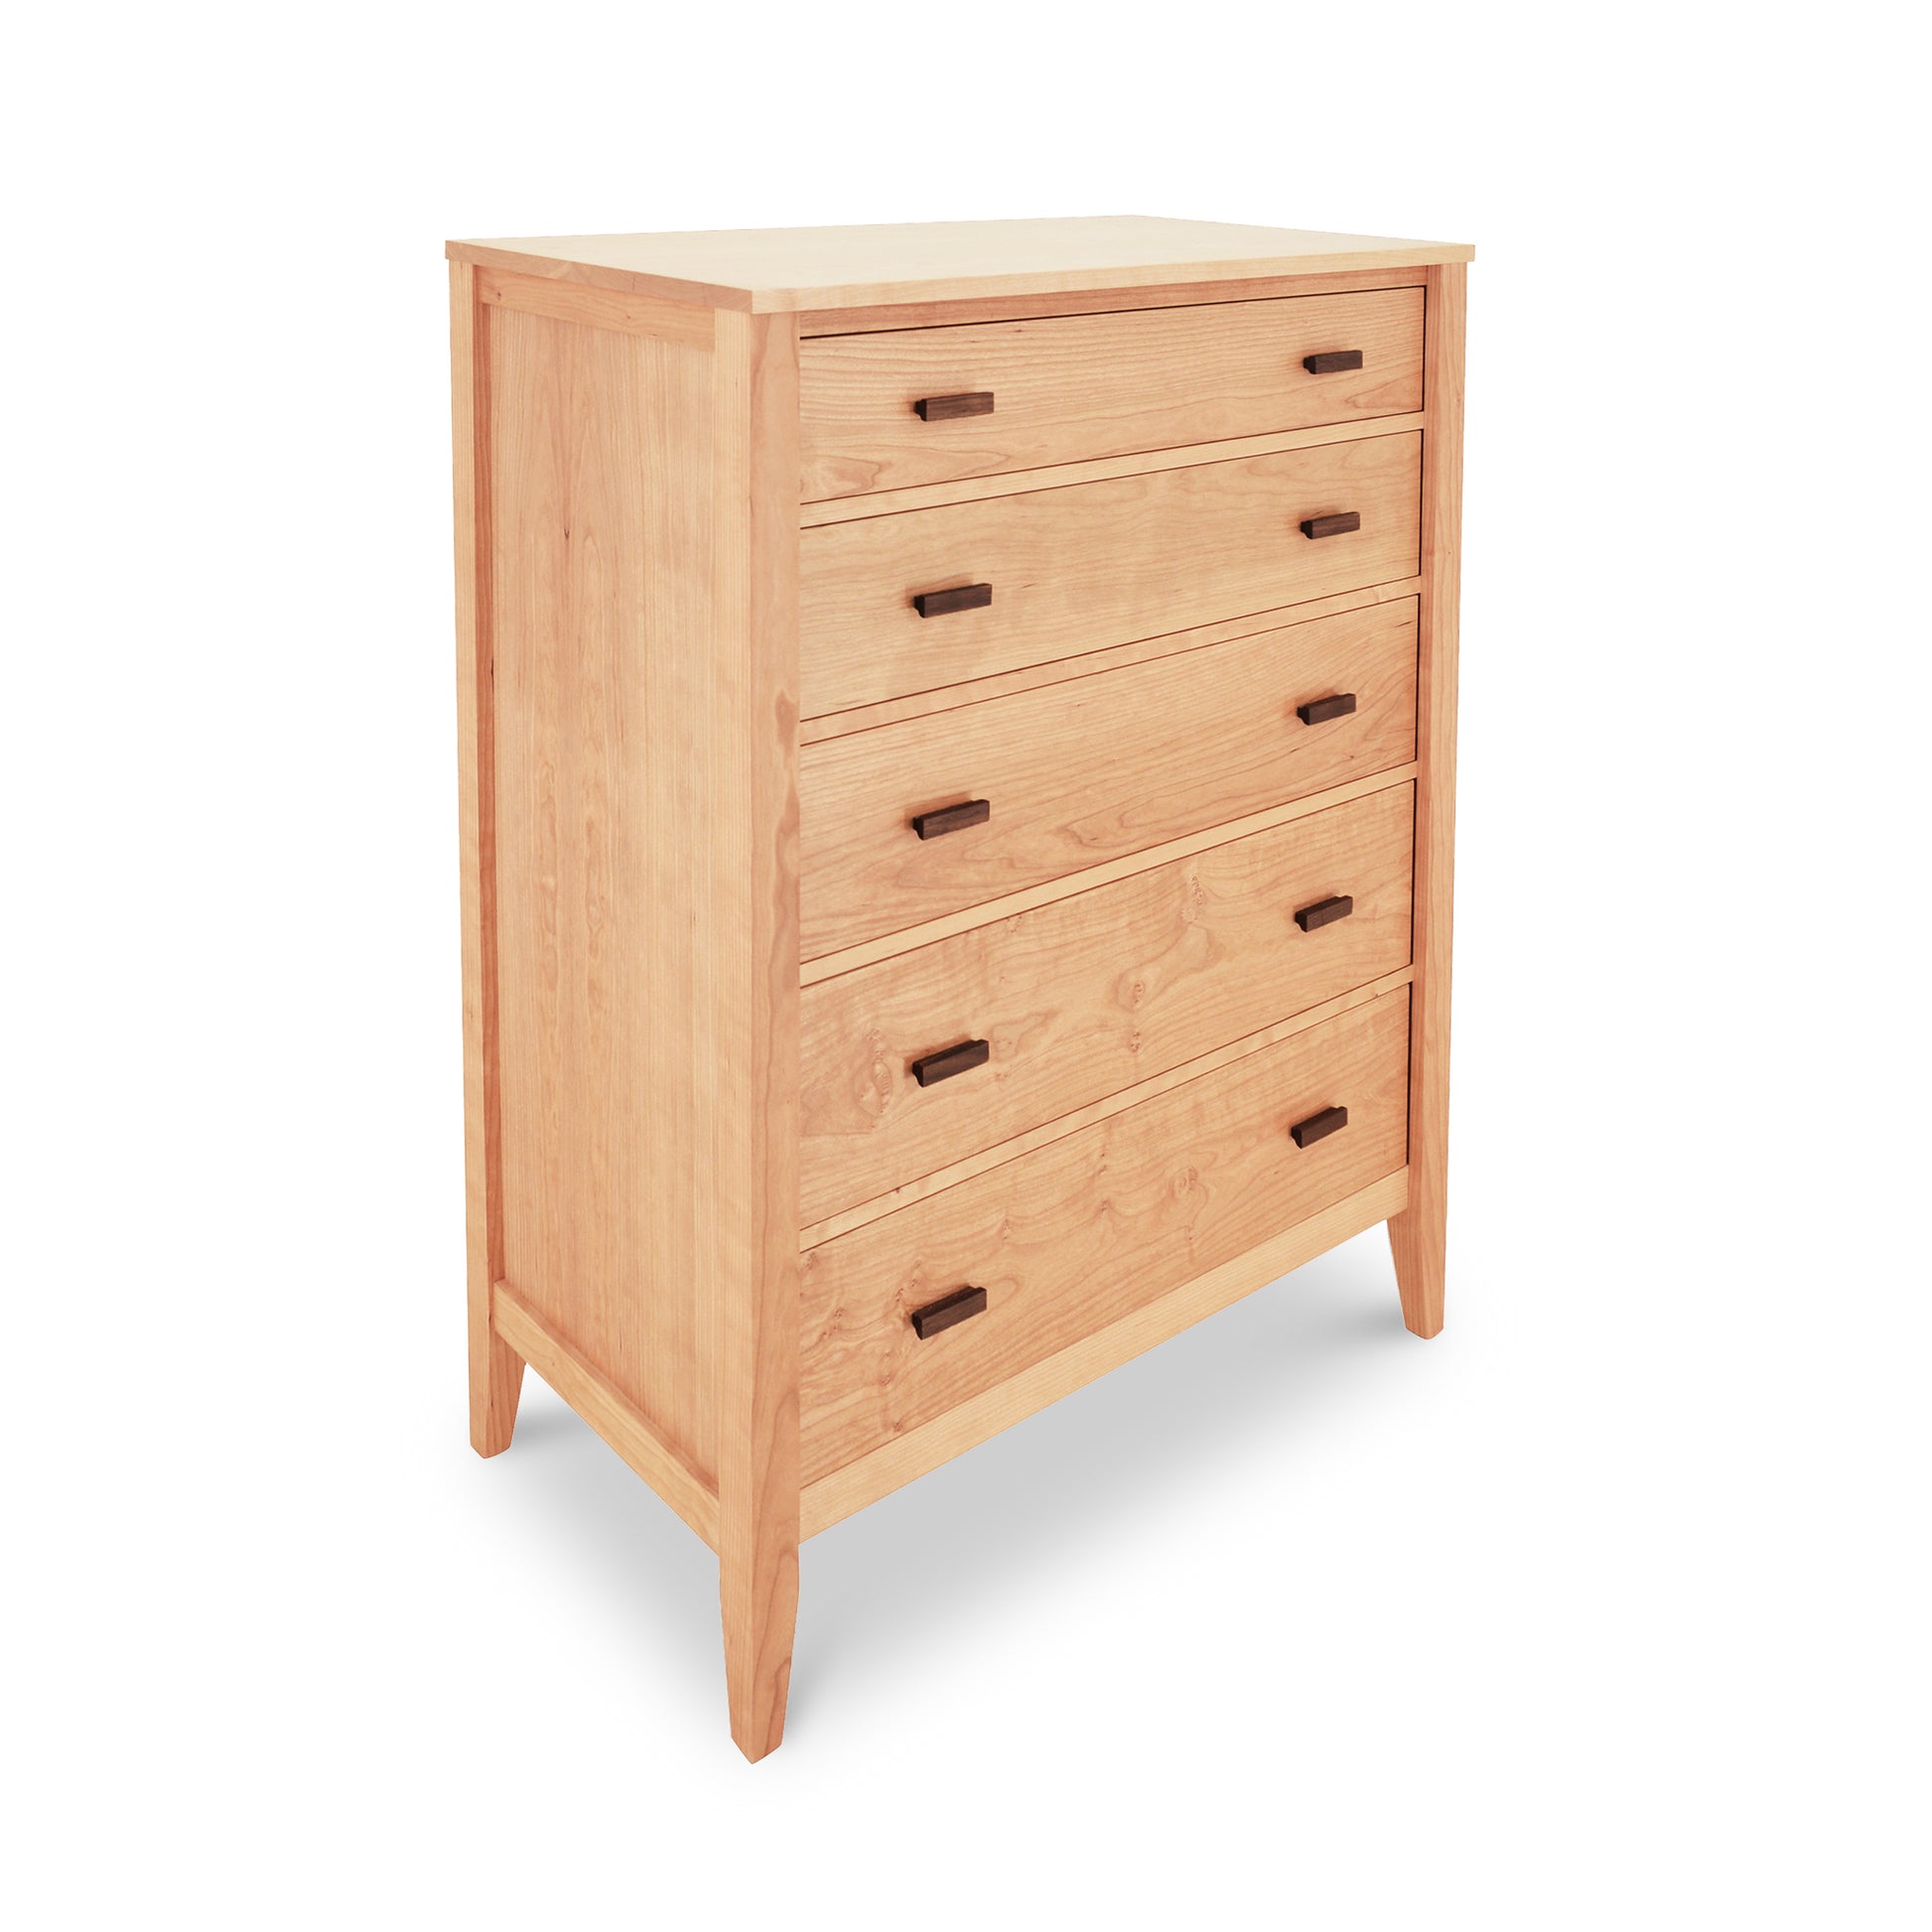 Andover Modern 5-Drawer Chest by Maple Corner Woodworks with horizontal pulls on a white background. The dresser features tapered legs and a minimalist, contemporary design.